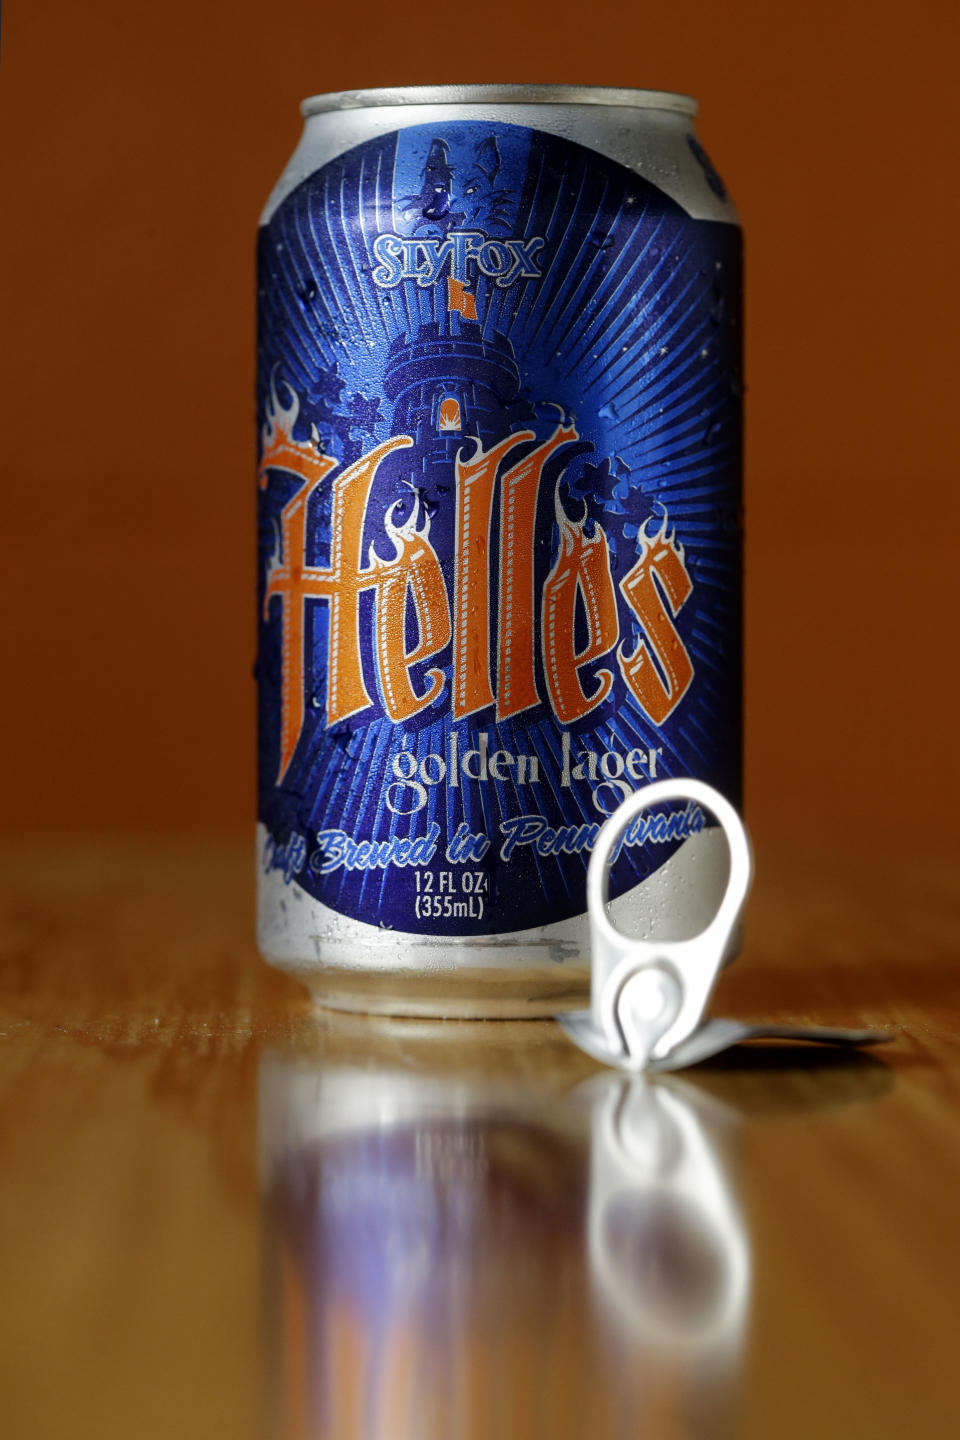 In this Monday, June 3, 2013 photo, a can of Helles Golden Lager with a 360 Lid is displayed at the Sly Fox Brewing Company, in Pottstown, Pa. Brewers and consumers debate using bottles or cans, innovation of the age-old staple continues as breweries seek to differentiate themselves on expanding beer shelves. Budweiser is selling a bowtie-shaped can that mirrors its iconic logo, Miller Lite is sold in a punch-top can, Sam Adams Boston Lager comes in cans designed to improve taste and now Sly Fox Brewing Co. is selling beer in "topless" cans with a peel-back lid that essentially turns it into a glass. (AP Photo/Matt Rourke)